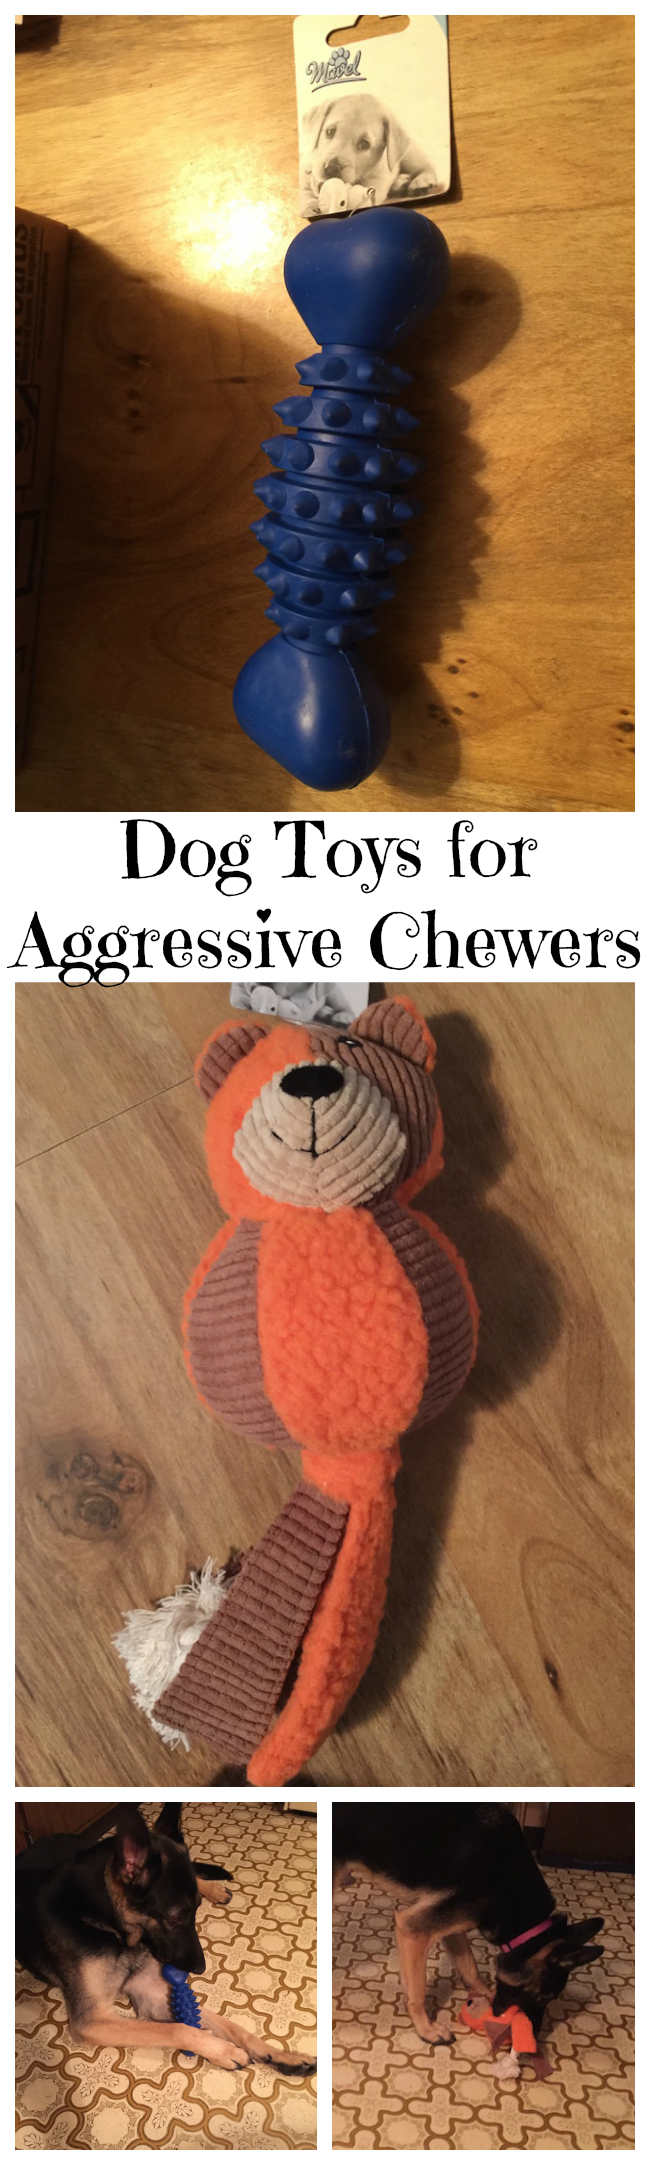 Dogs can never have too many toys. If your dog is like Harley, she goes through dog toys like crazy. Always trying to wreck them and ripping them apart.